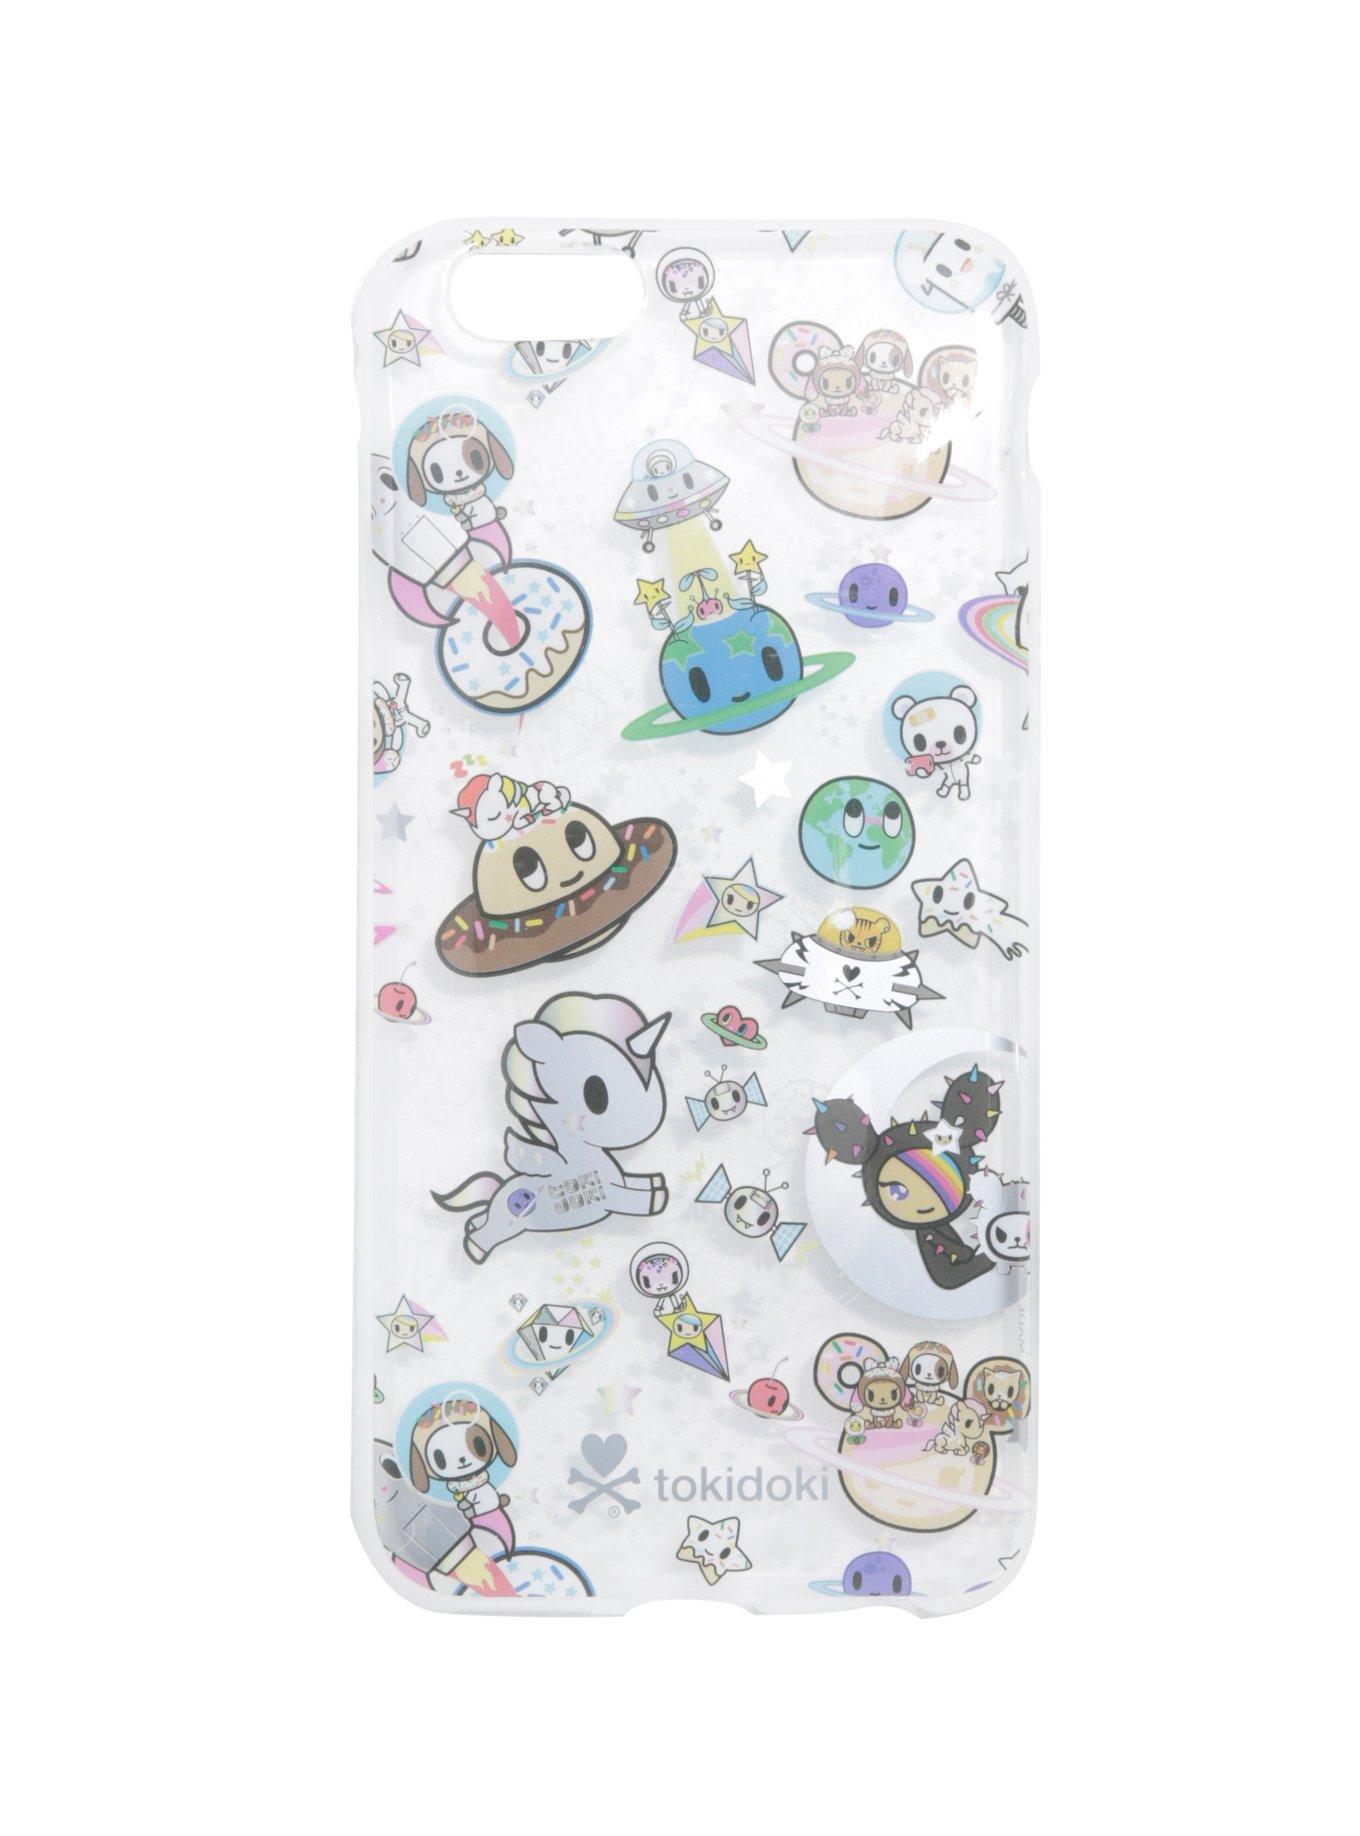 Loungefly Tokidoki Space Characters Print iPhone 6/6s Case, , hi-res